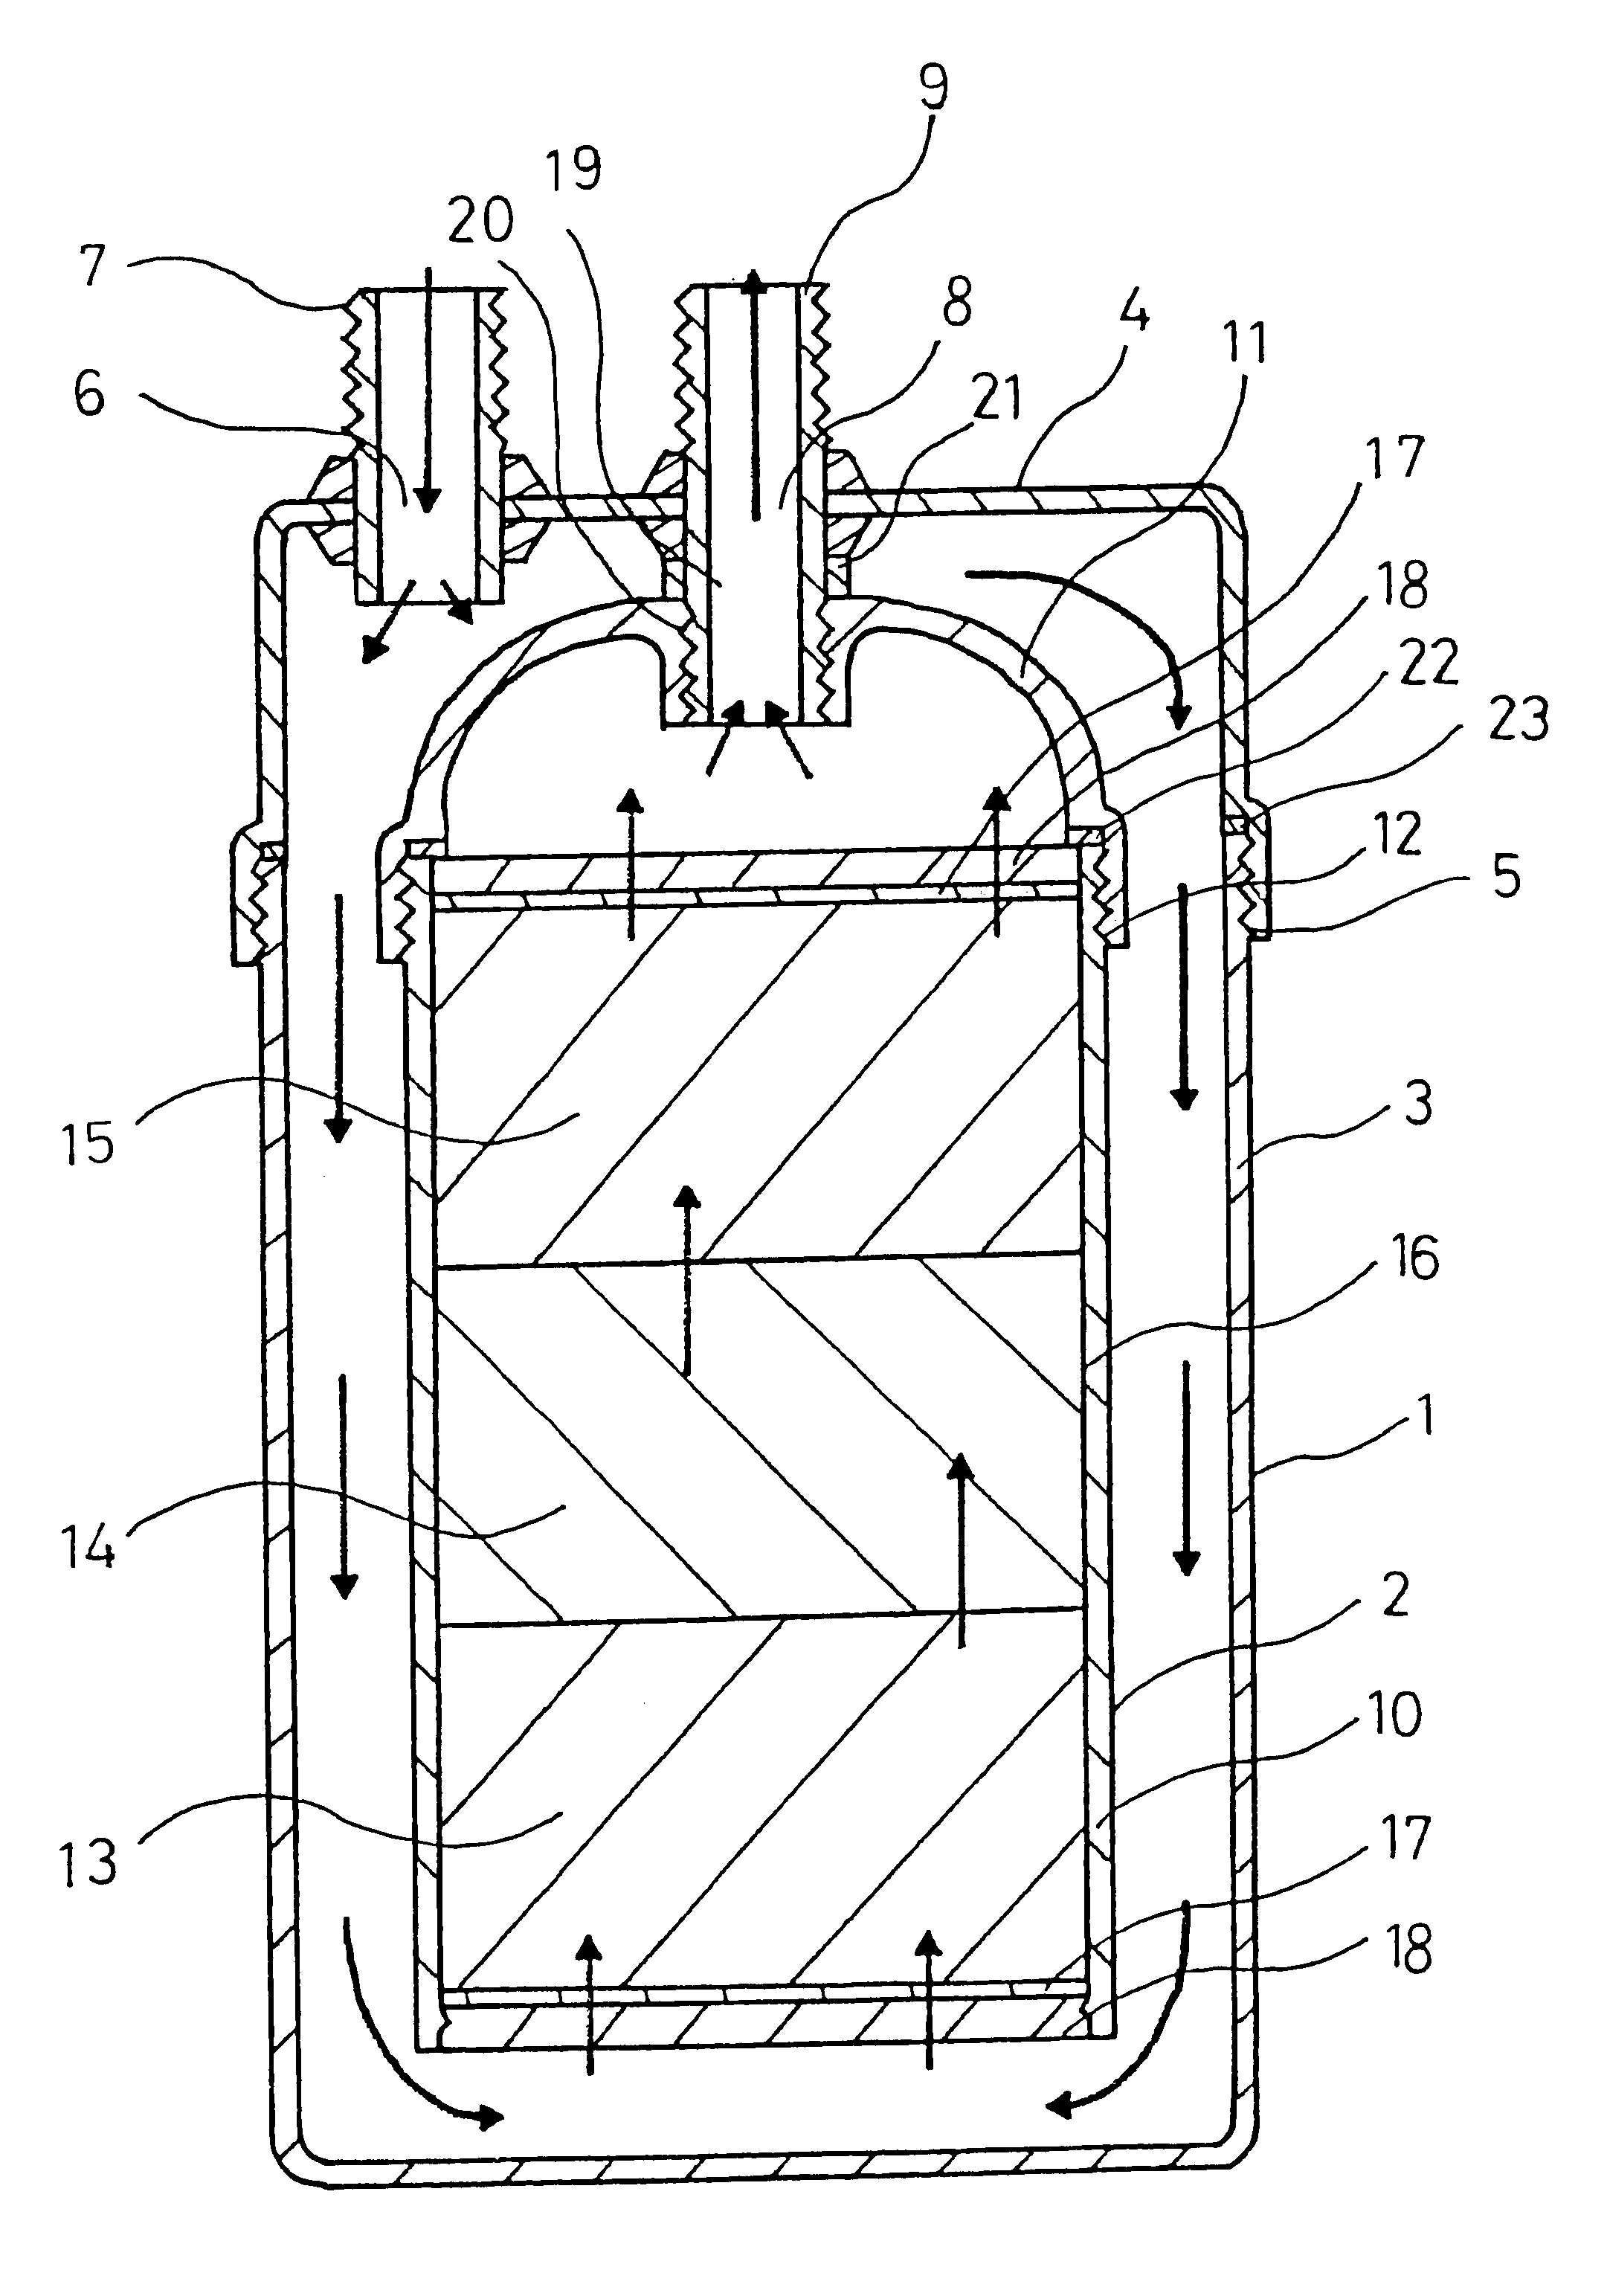 Porous ceramic for producing alkali ion water, method for producing the porous ceramic and device for producing the alkali ion water